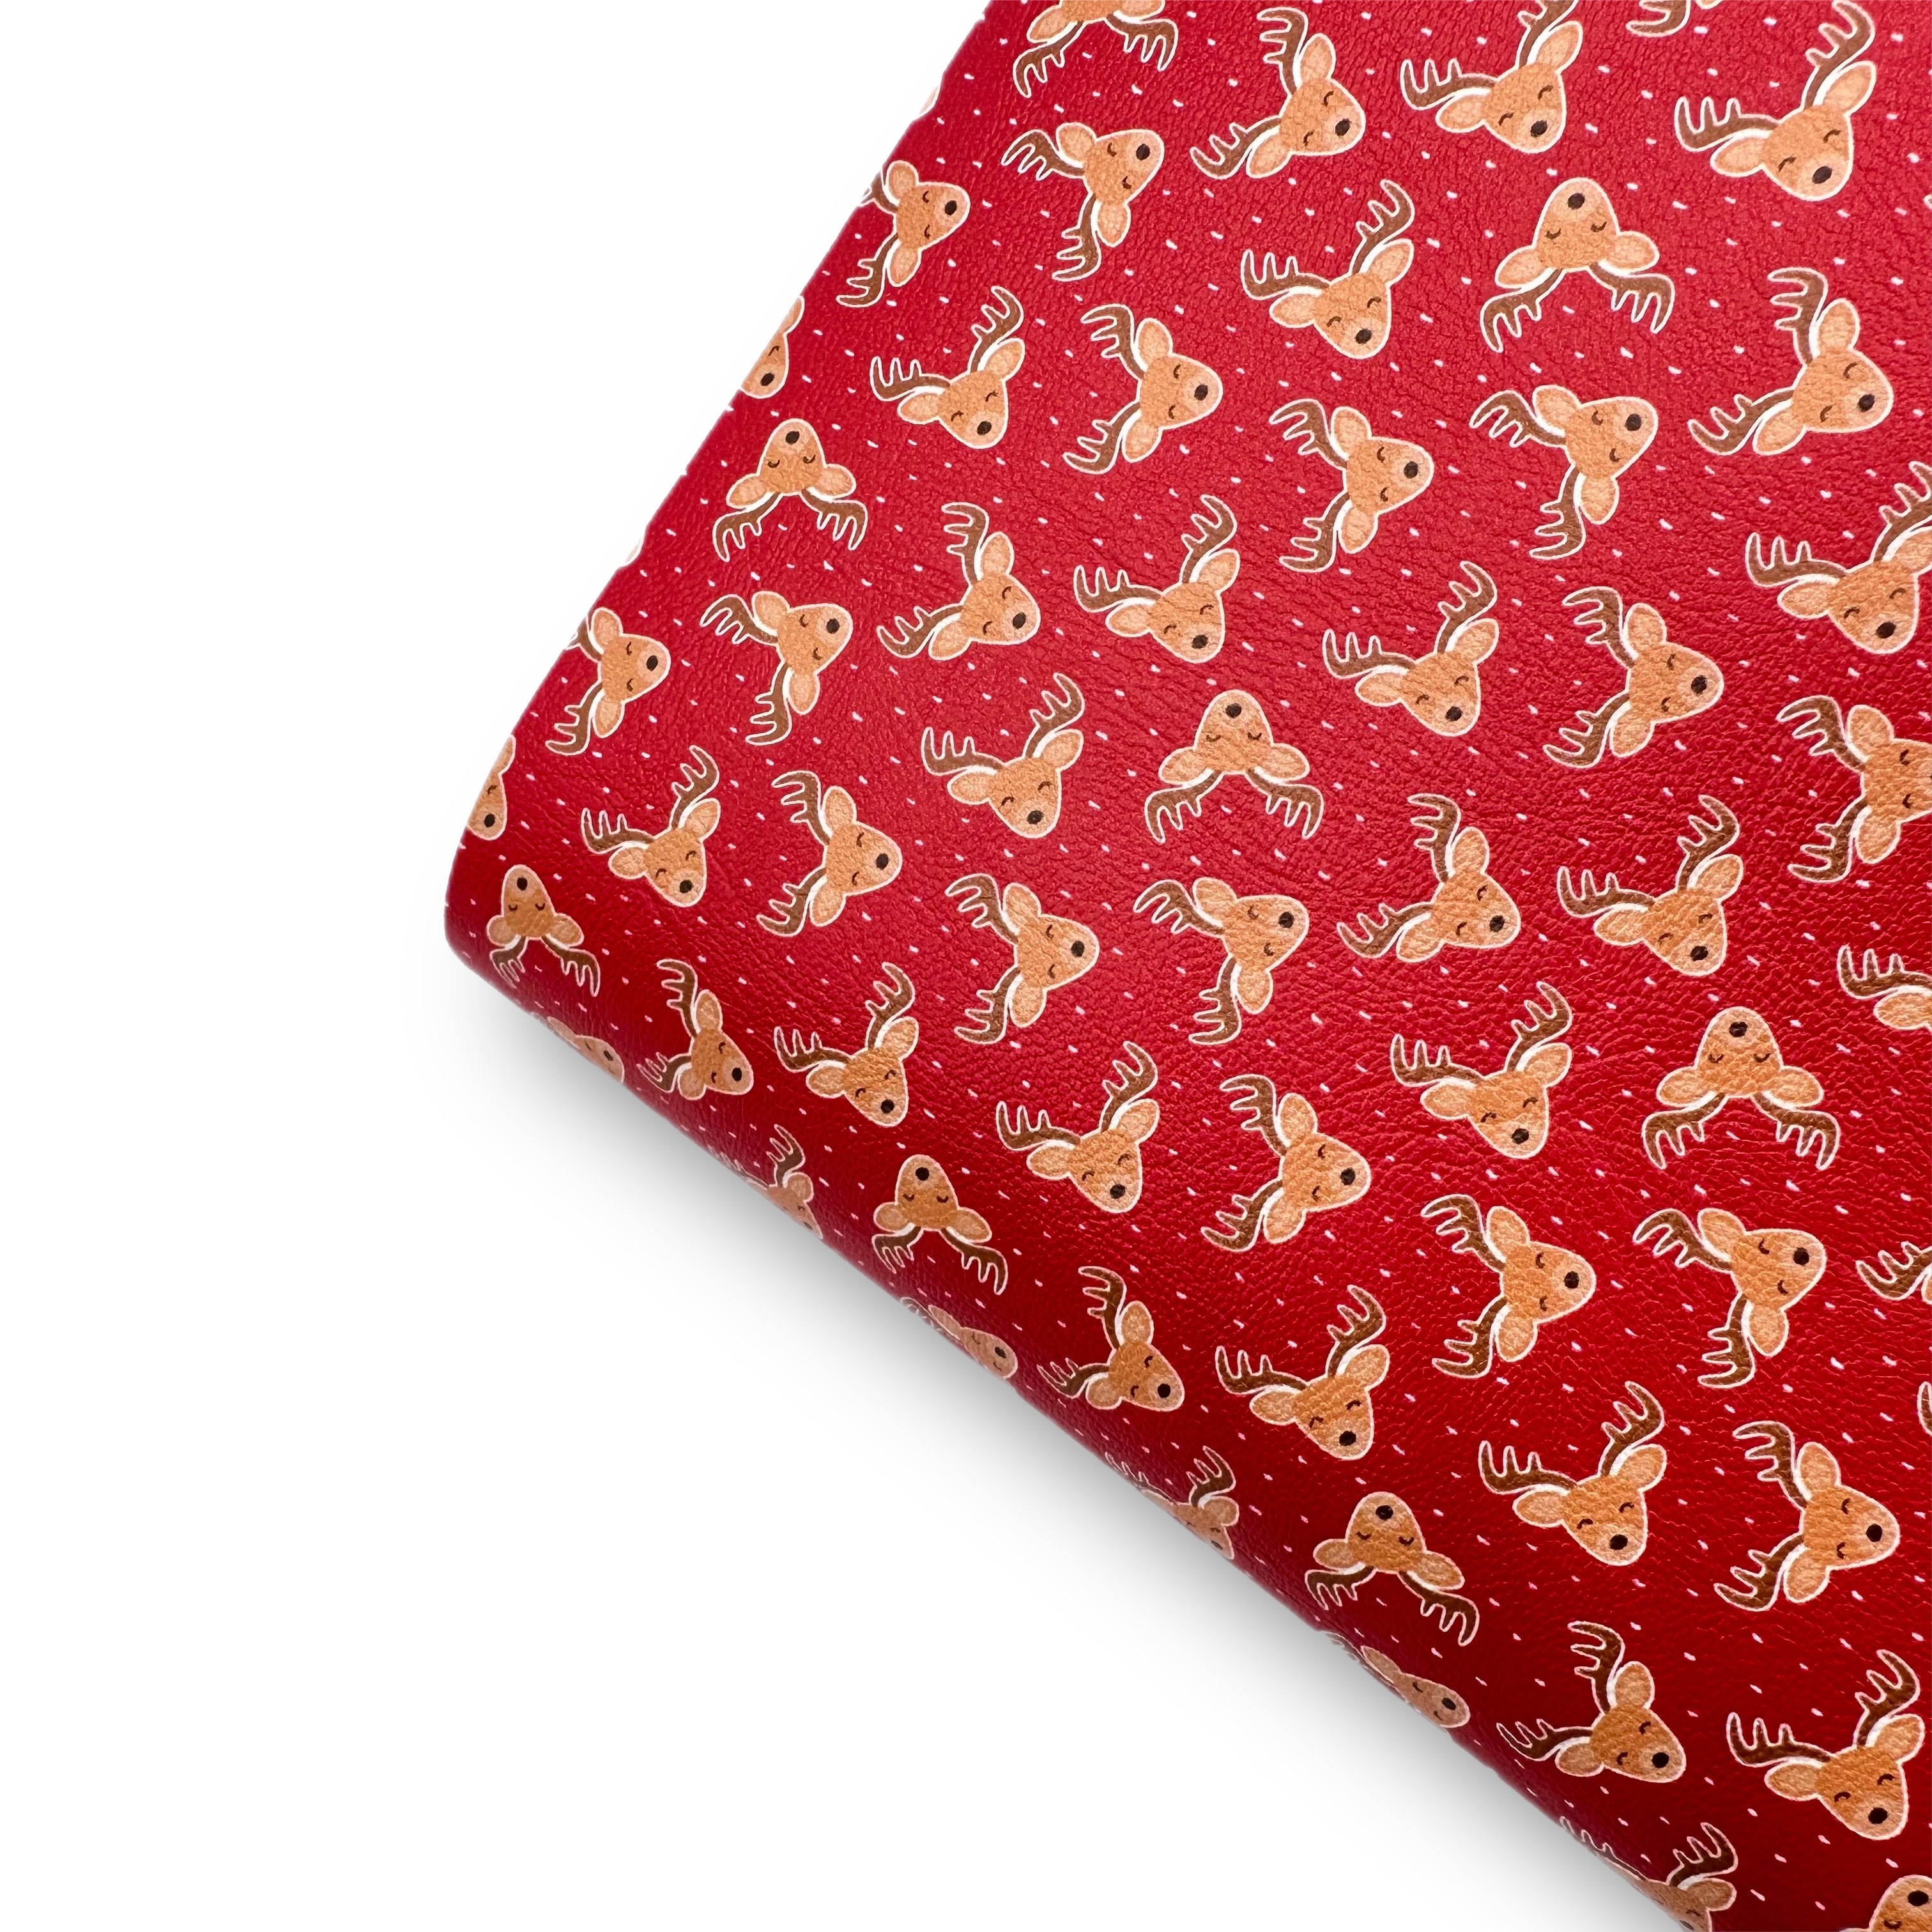 True Red Reindeers Premium Faux Leather Fabric Sheets